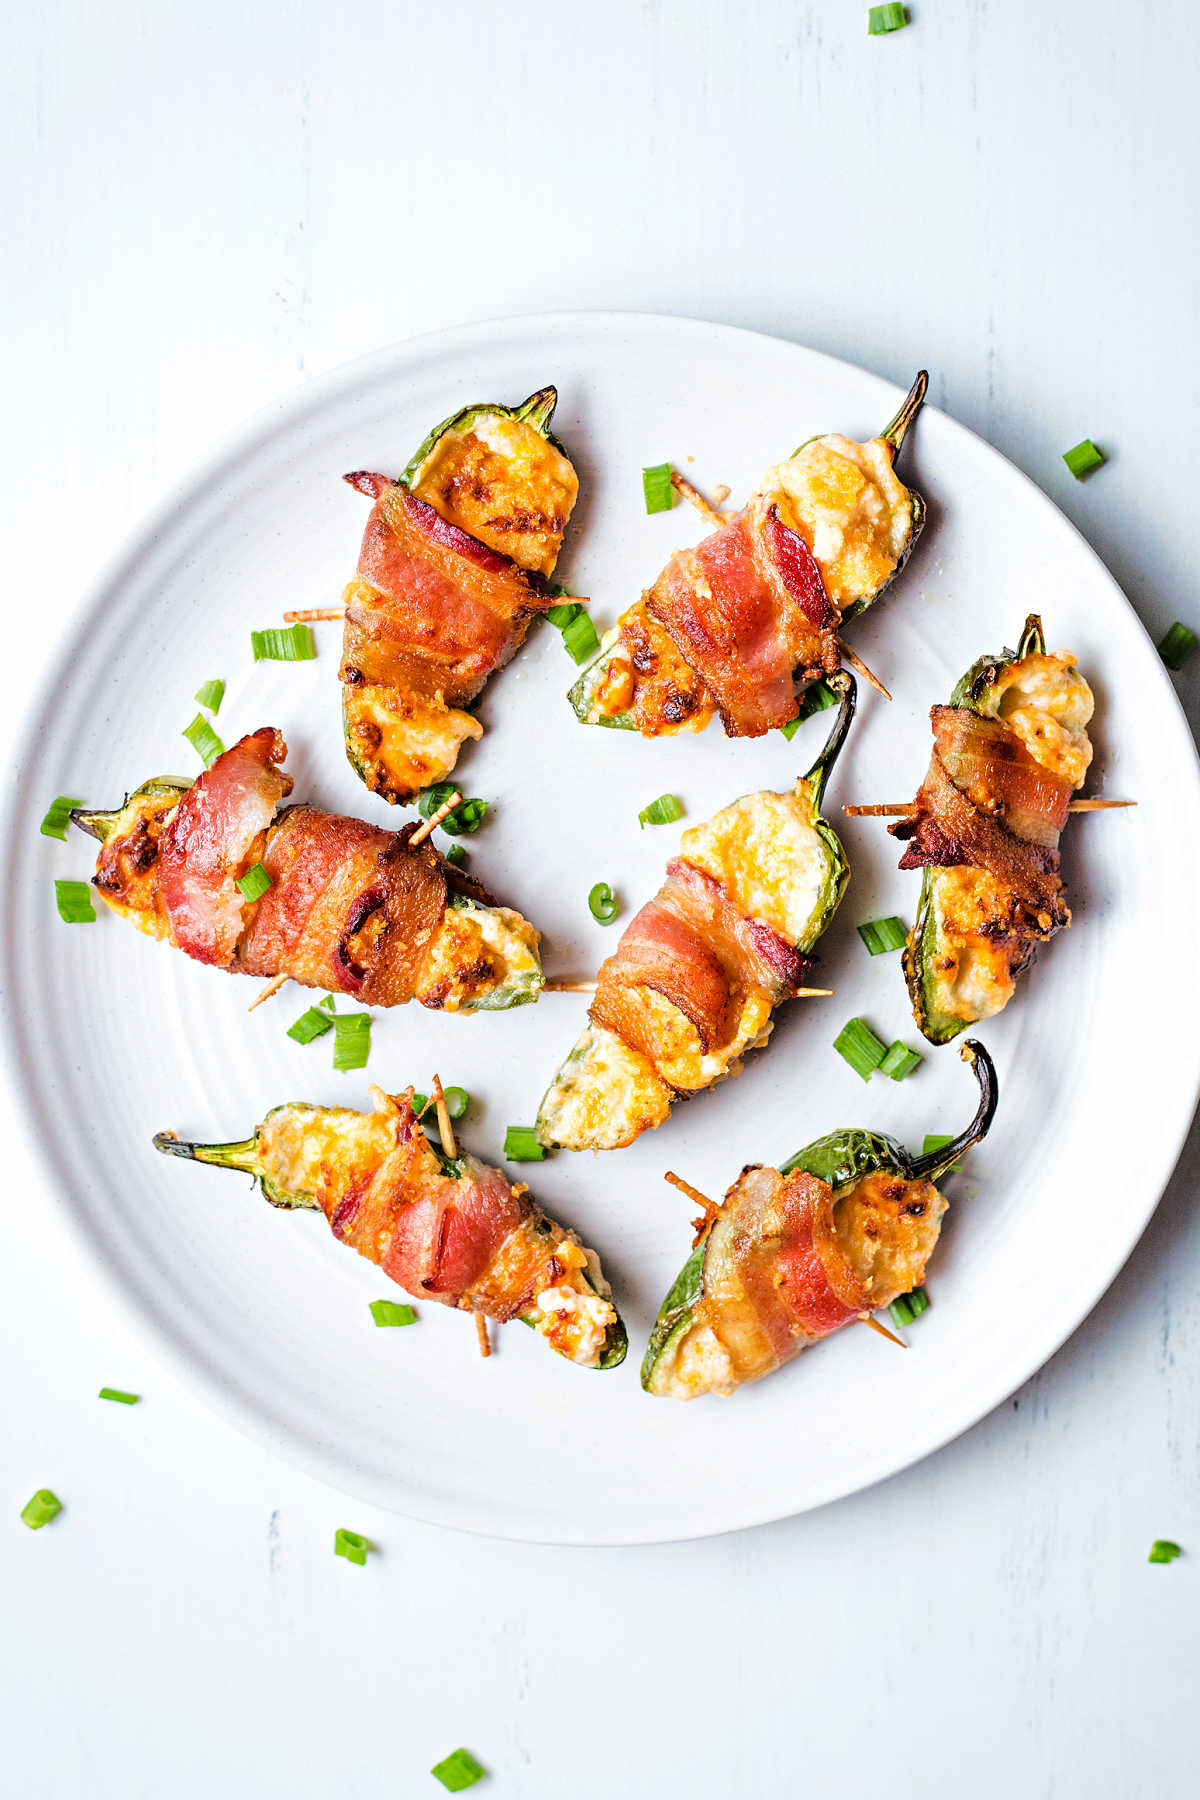 bacon wrapped jalapeno poppers on a white plate garnished with sliced green onion tops on a table.